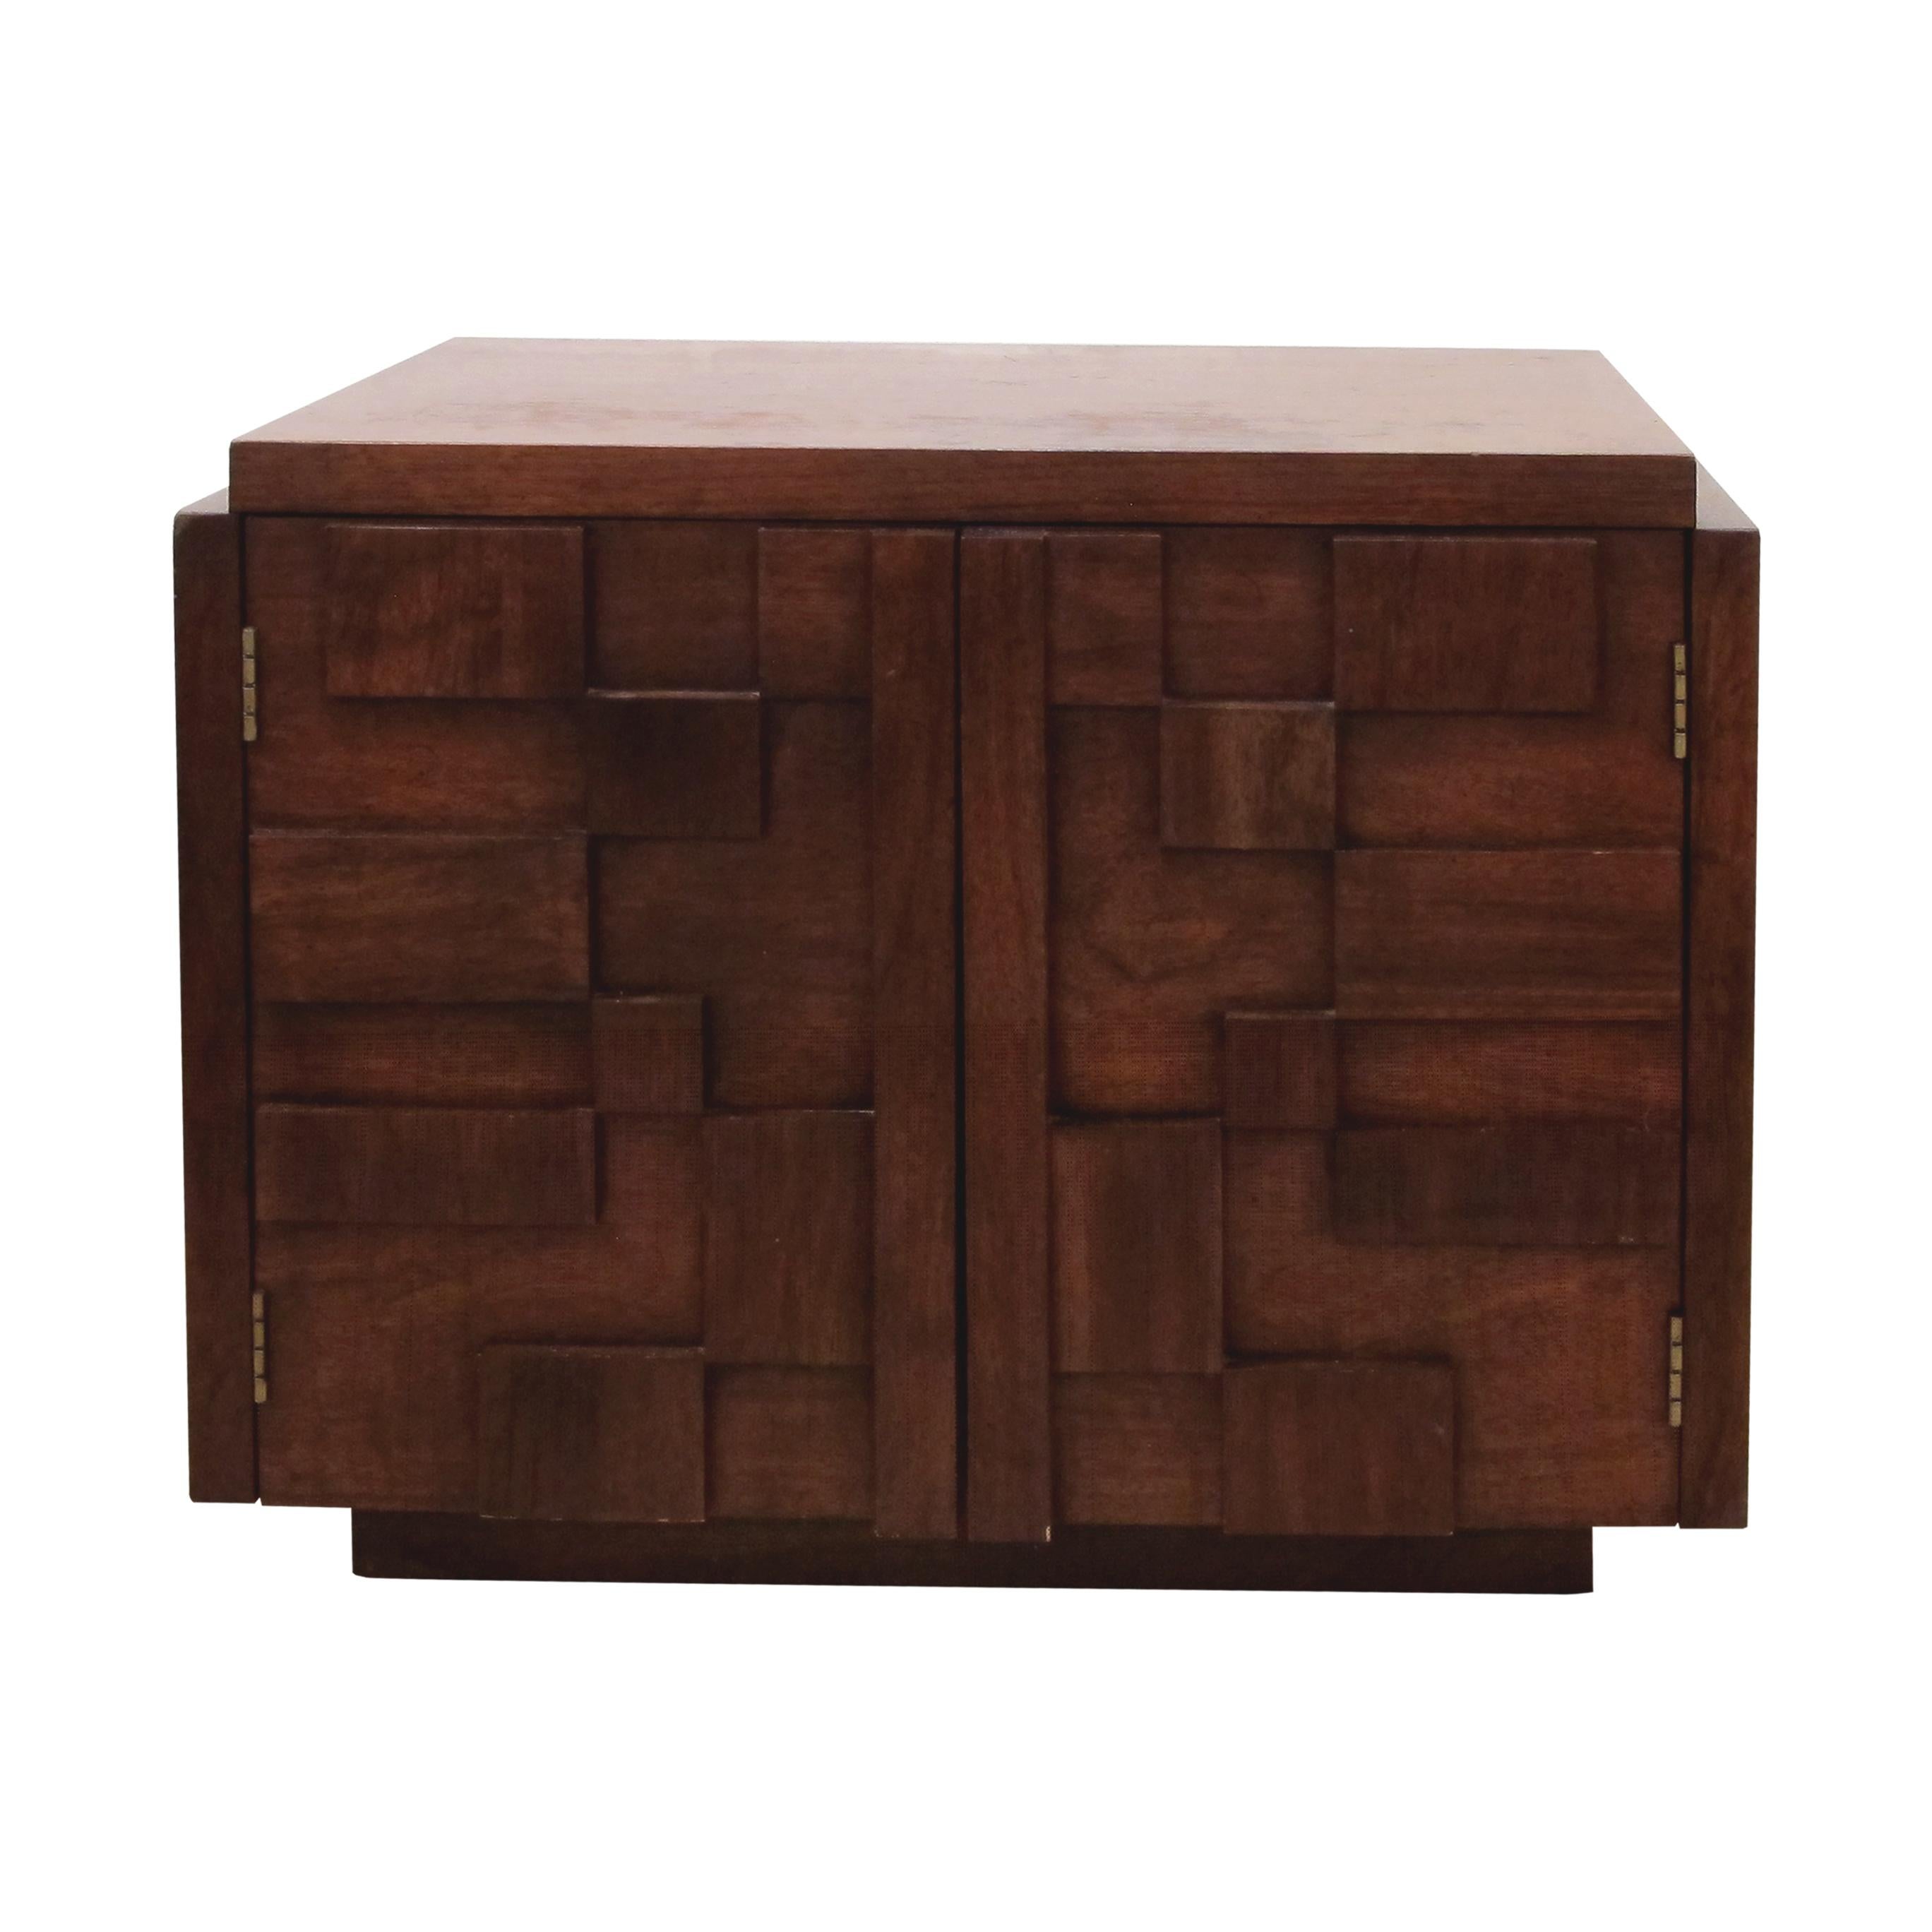 American 1960S Pair of “Brutalist” Walnut Staccato Paul Evans Bedside/End Tables by Lane For Sale